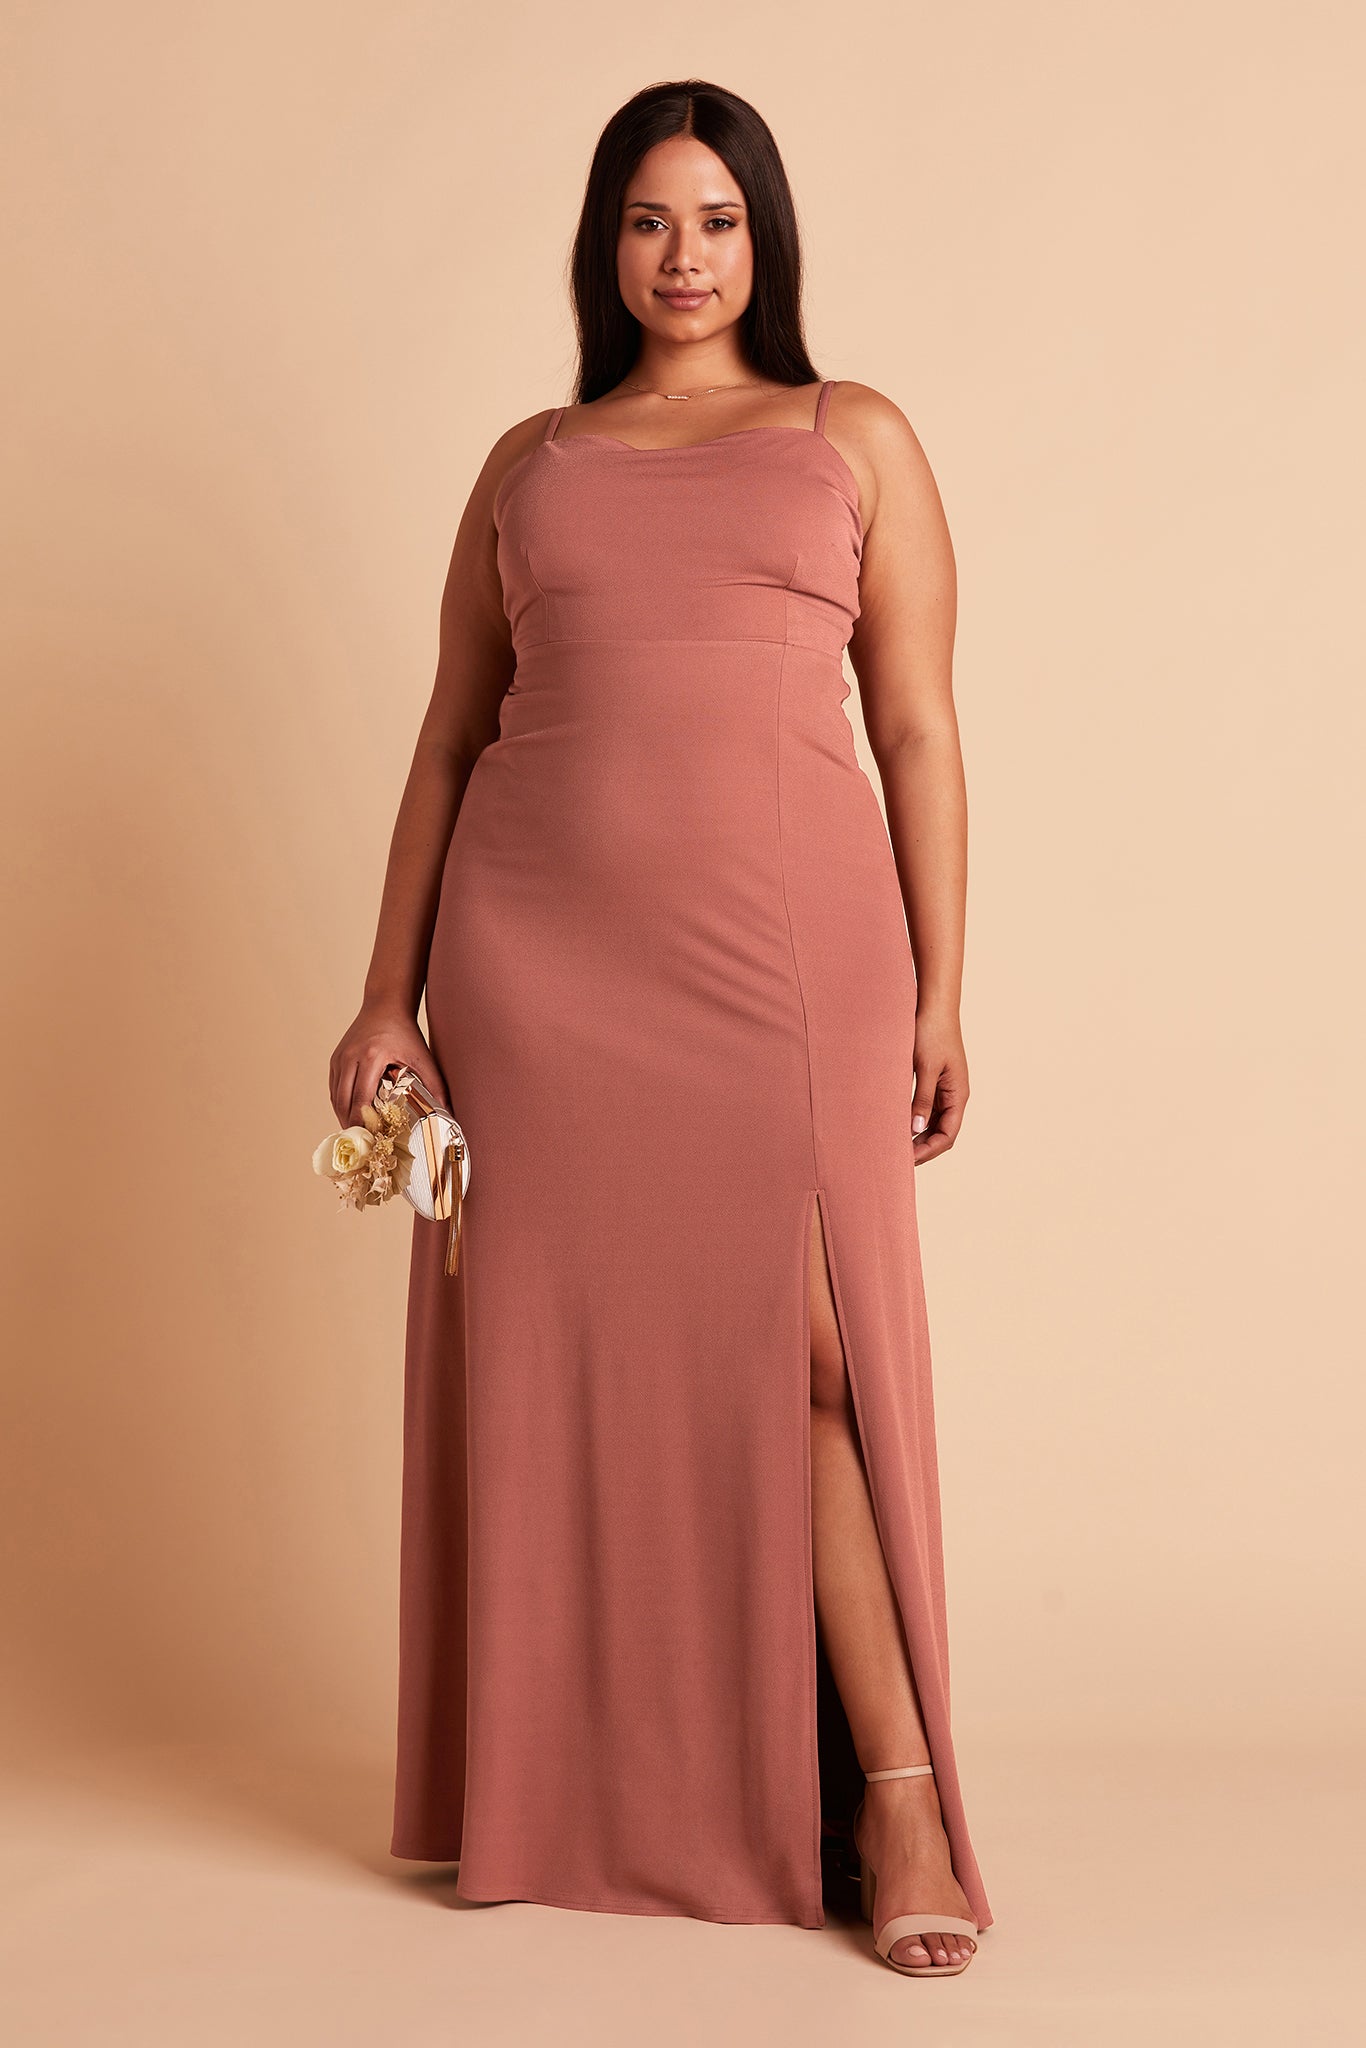 Benny plus size bridesmaid dress with slit in desert rose crepe by Birdy Grey, front view